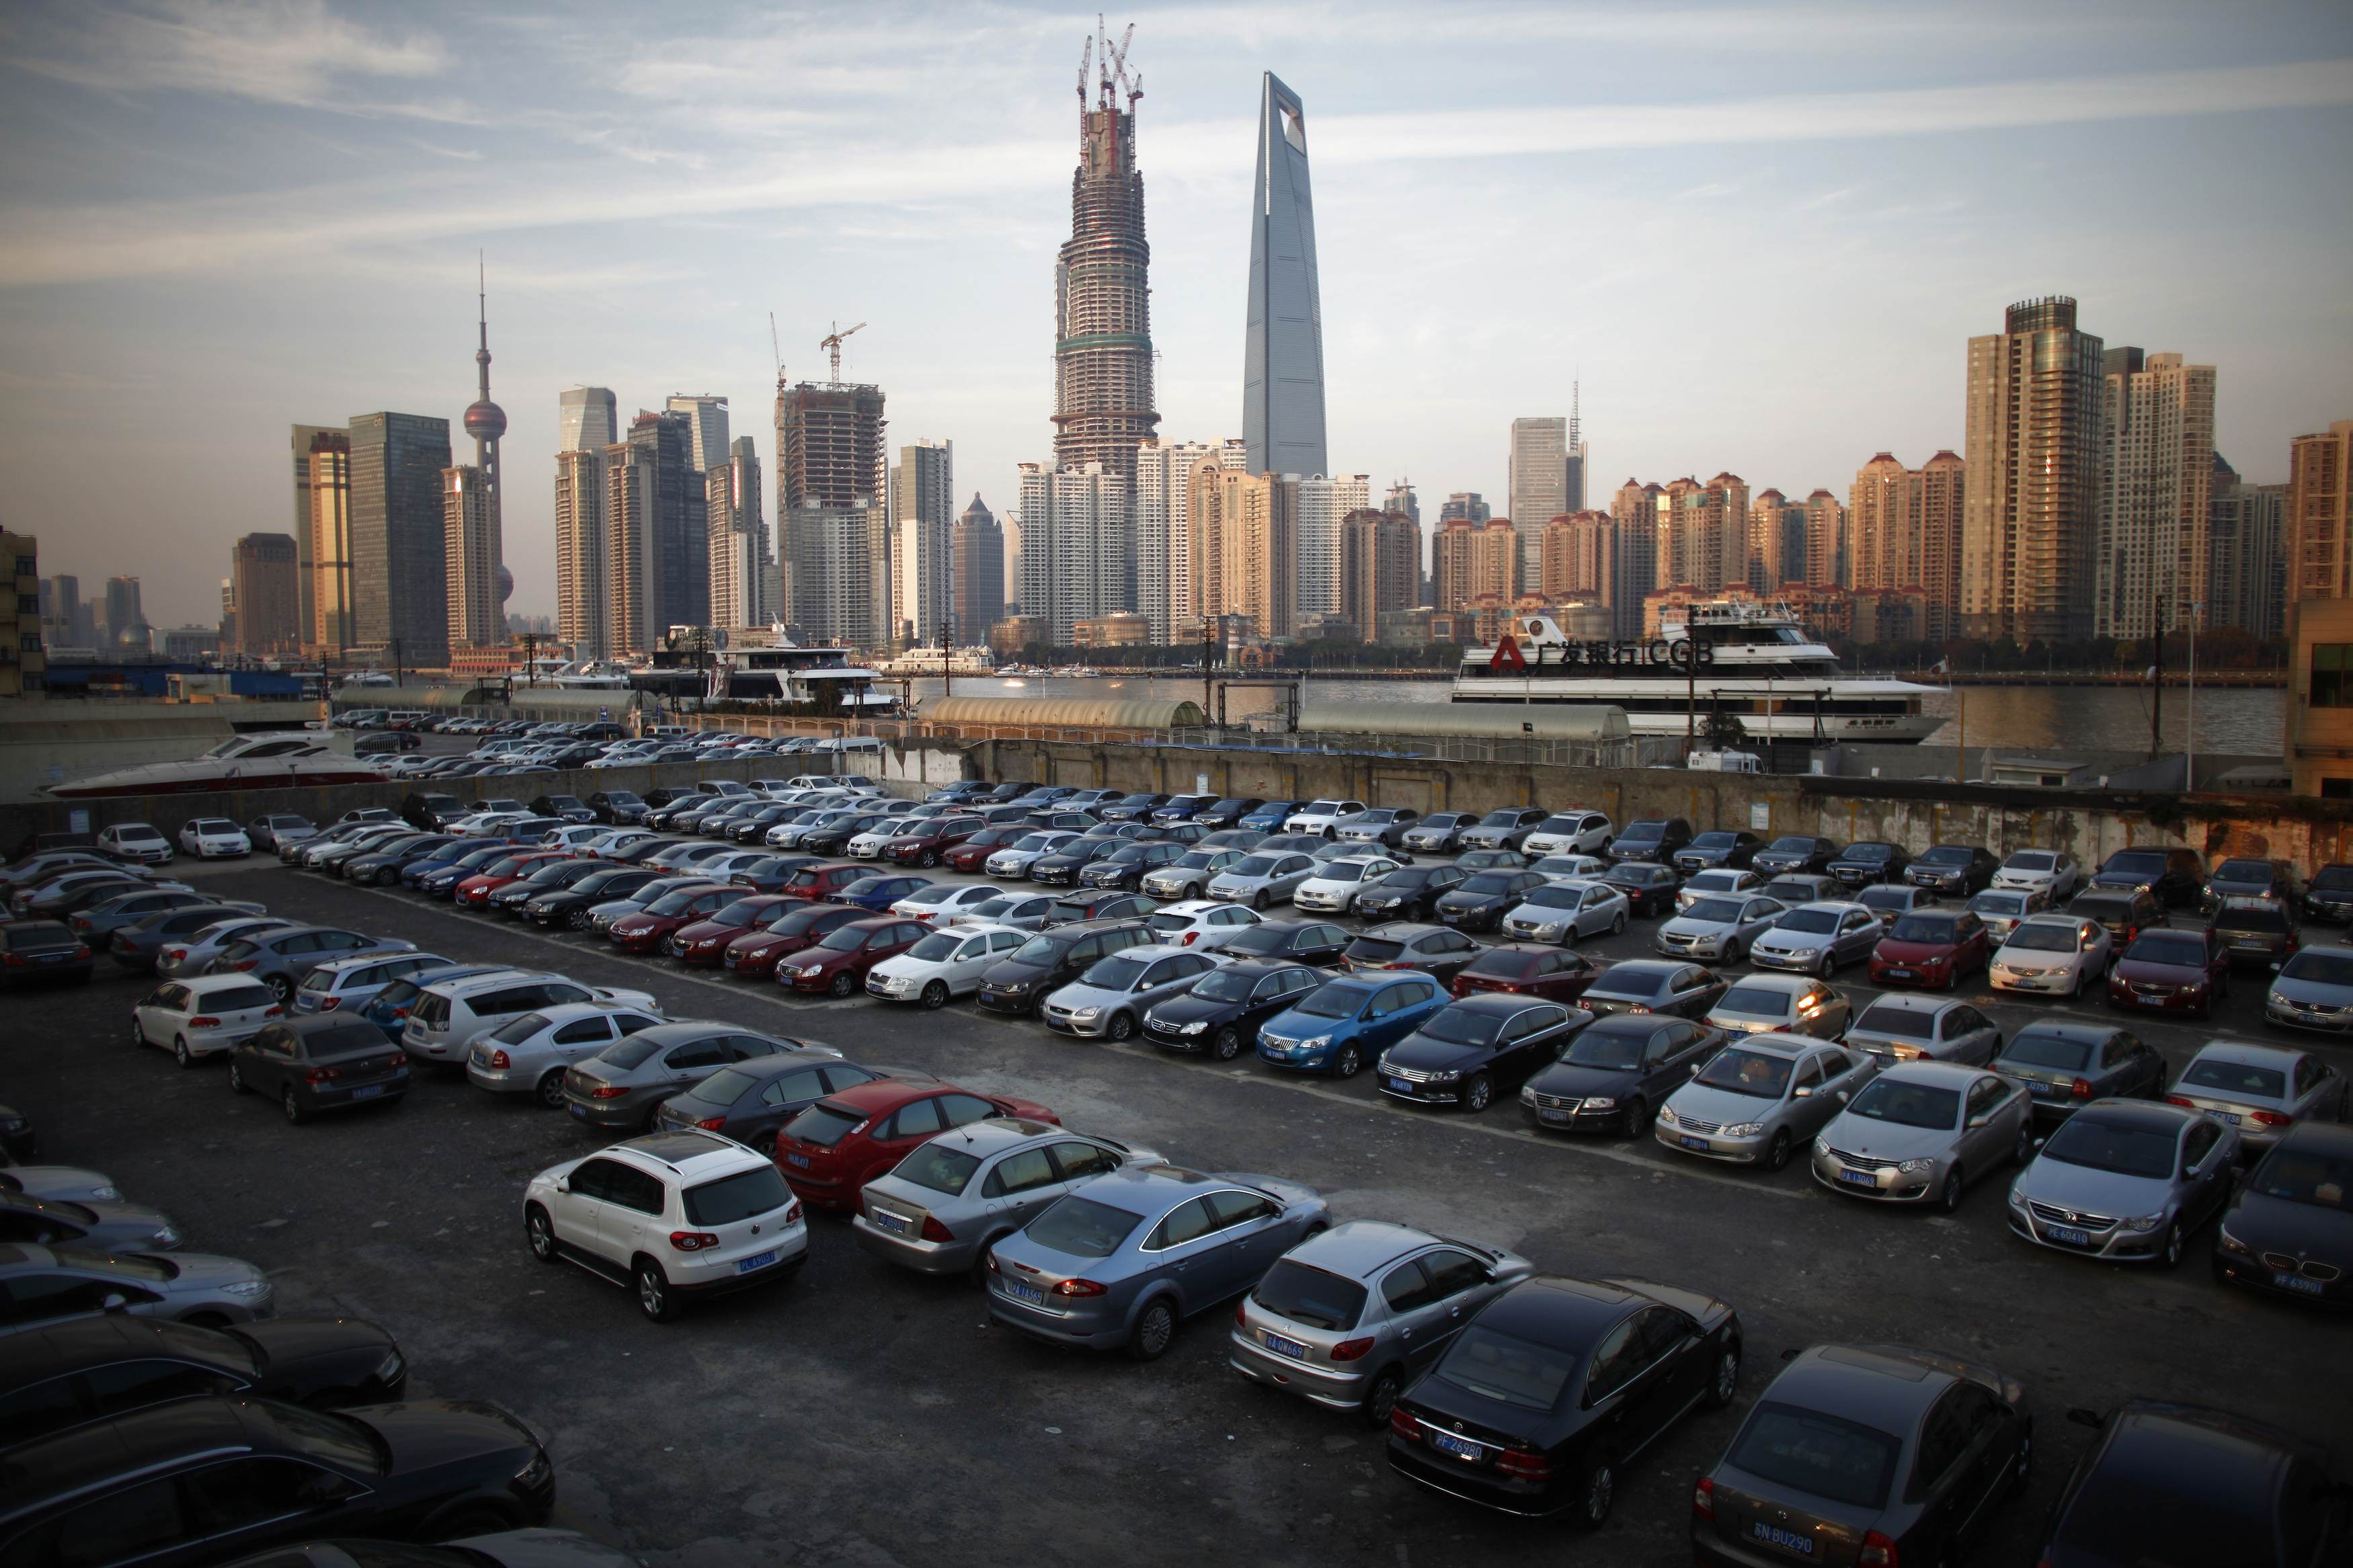 Apps are helping match drivers with available parking bays in Shanghai. Photo: Reuters